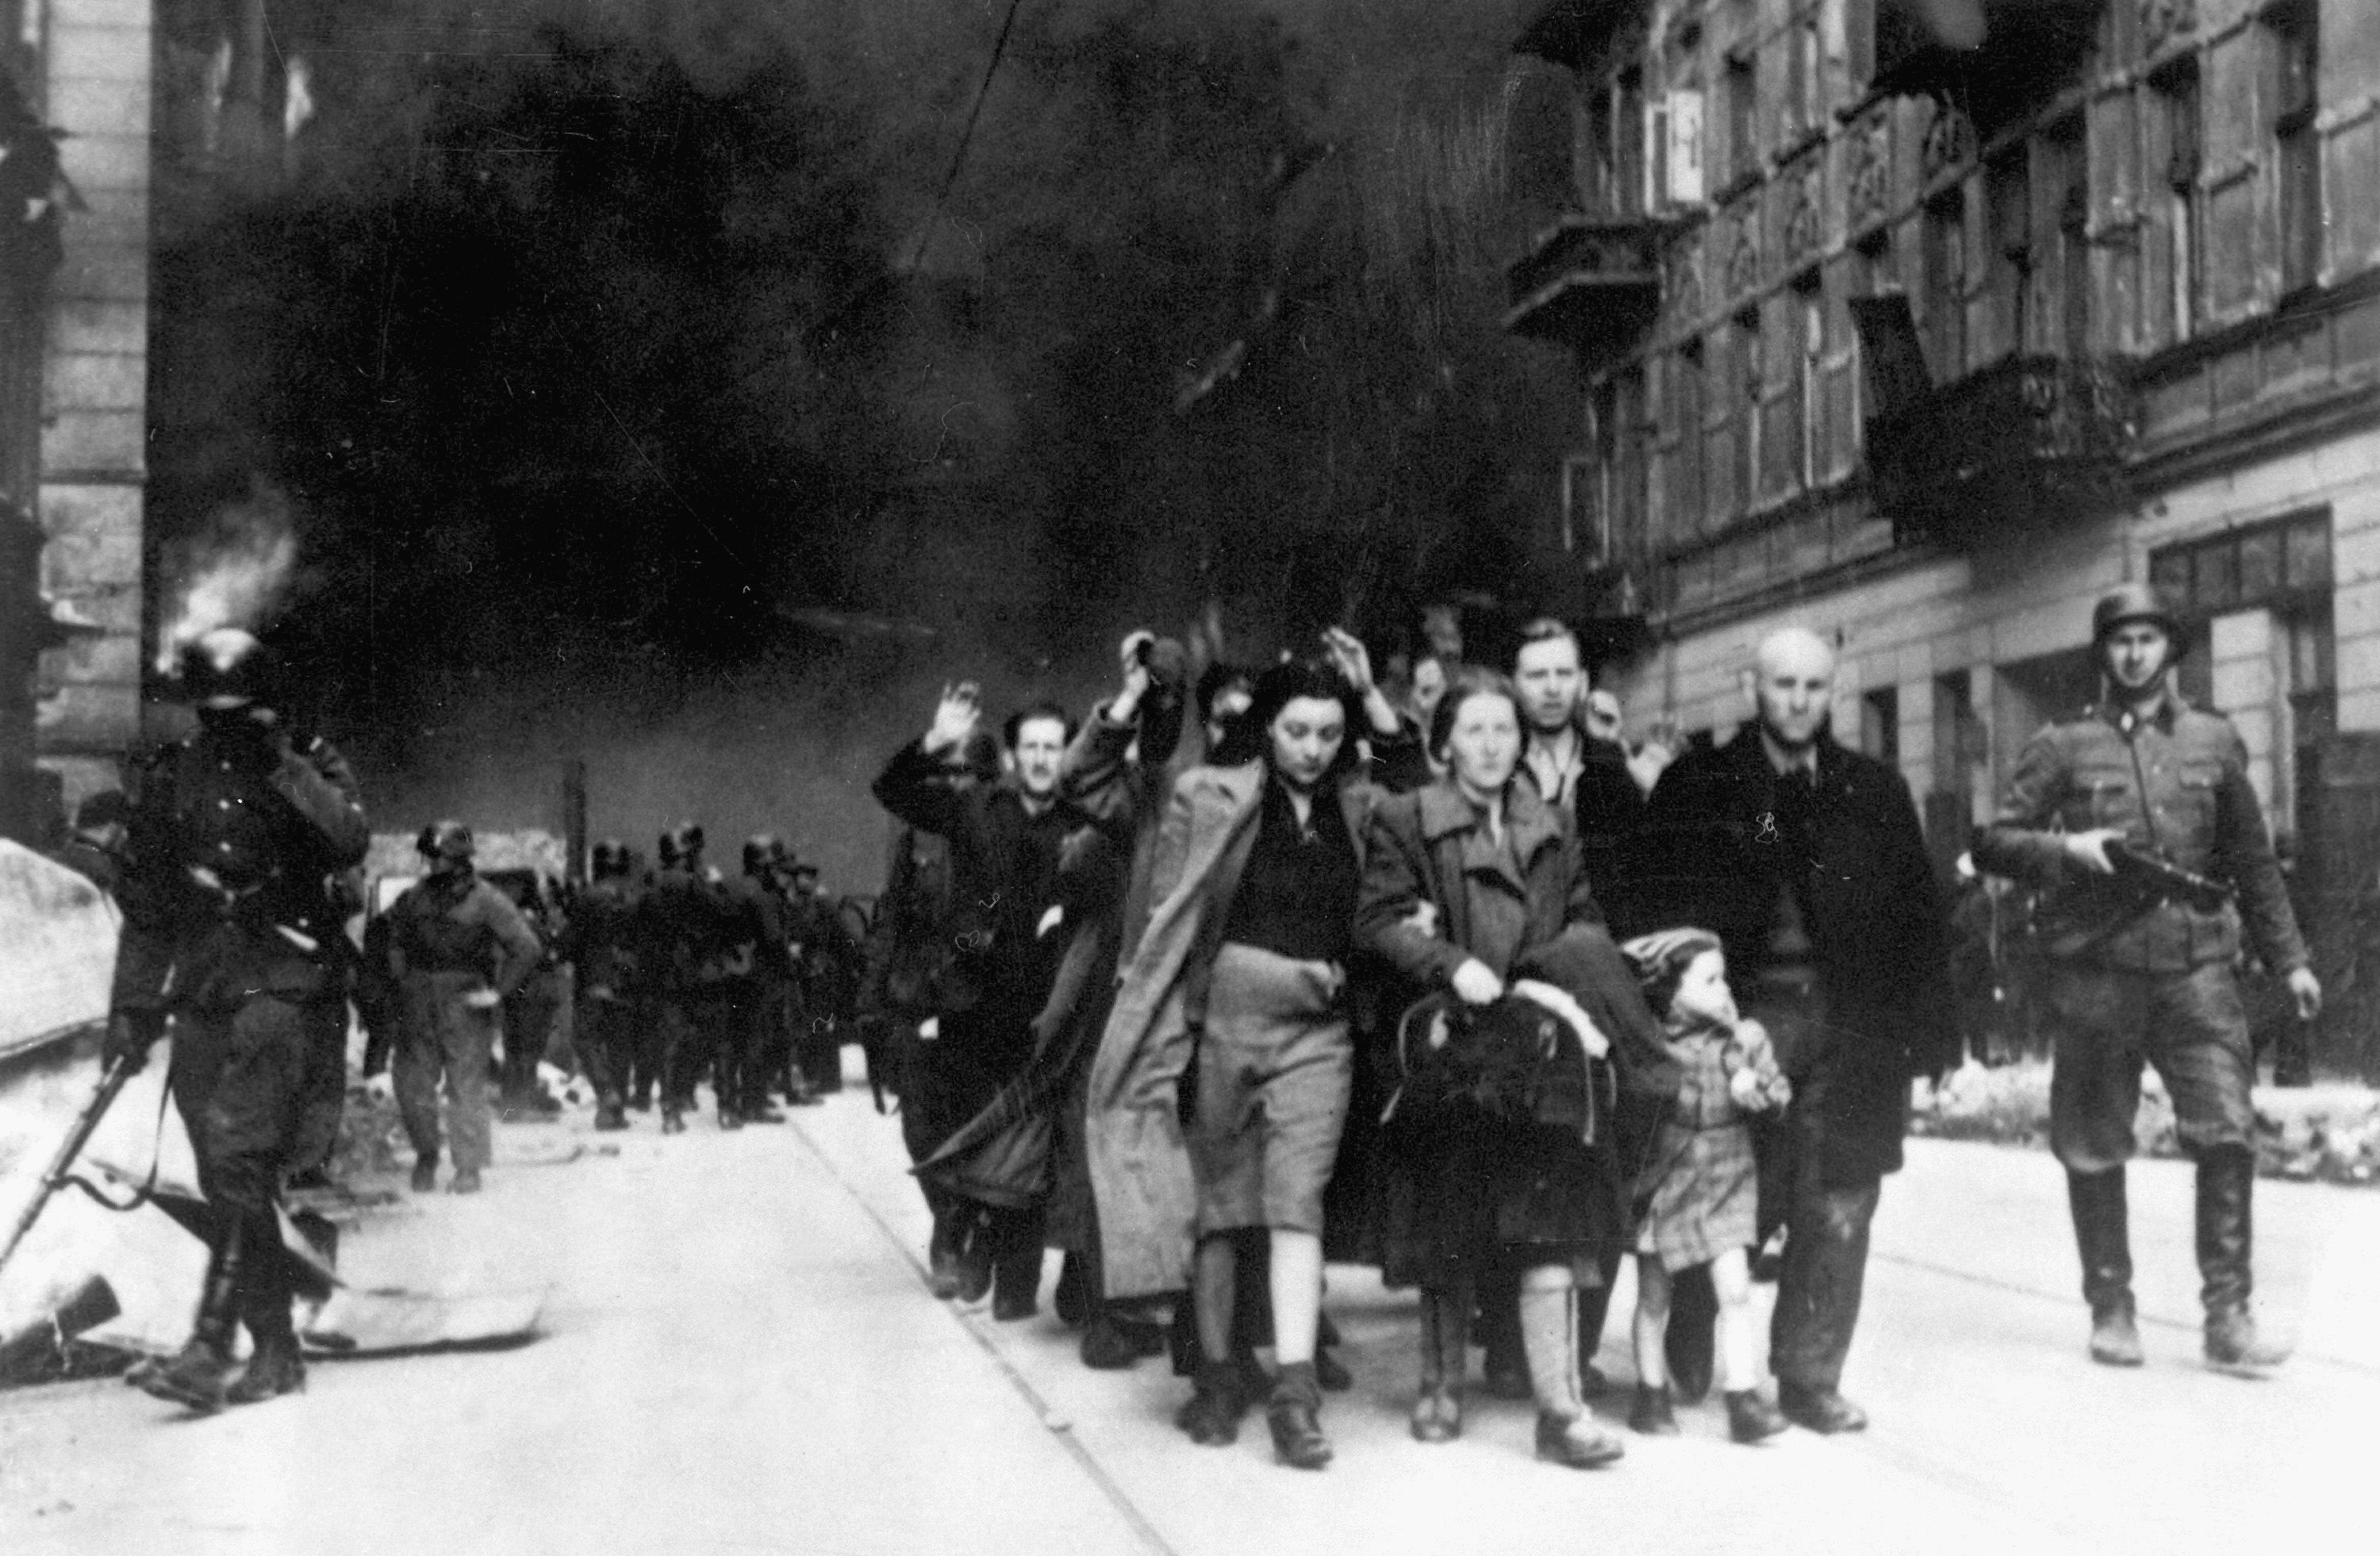 Jews in the Warsaw Ghetto are lead to a deportation point sometime between April 19 and May 16, 1943